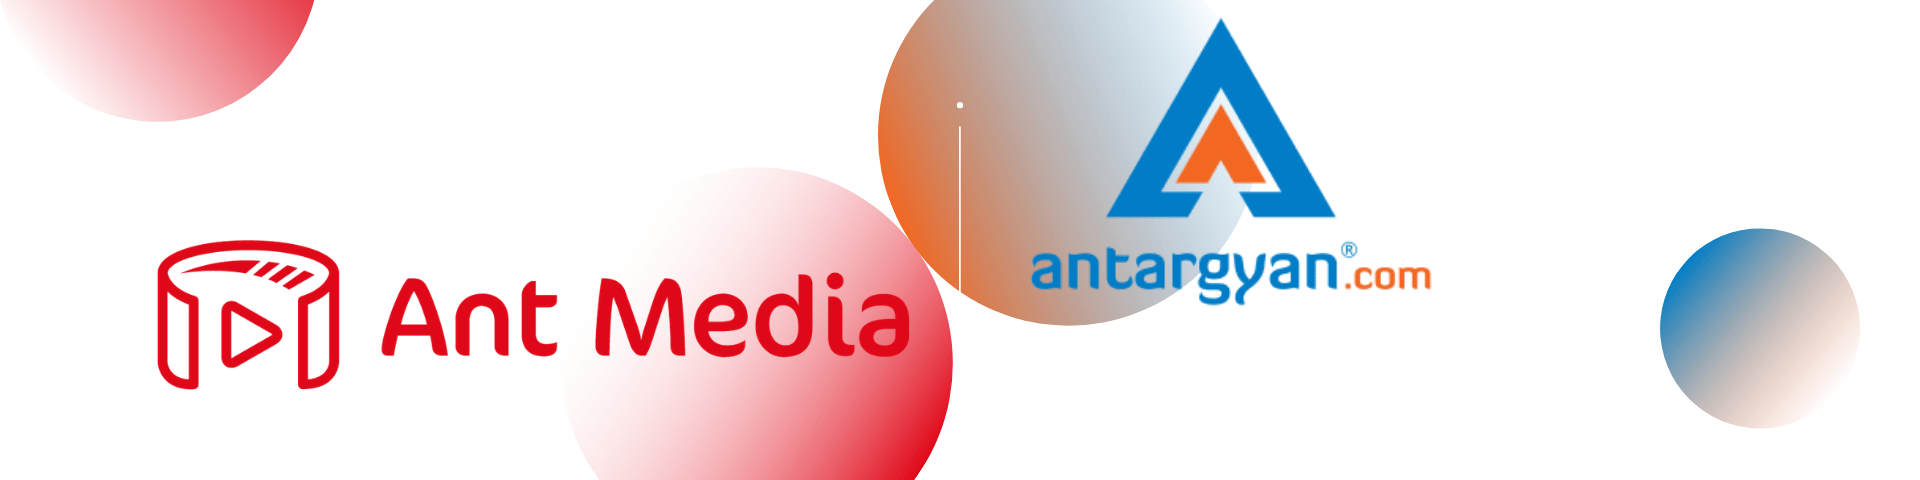 Antargyan and Ant Media Case Study